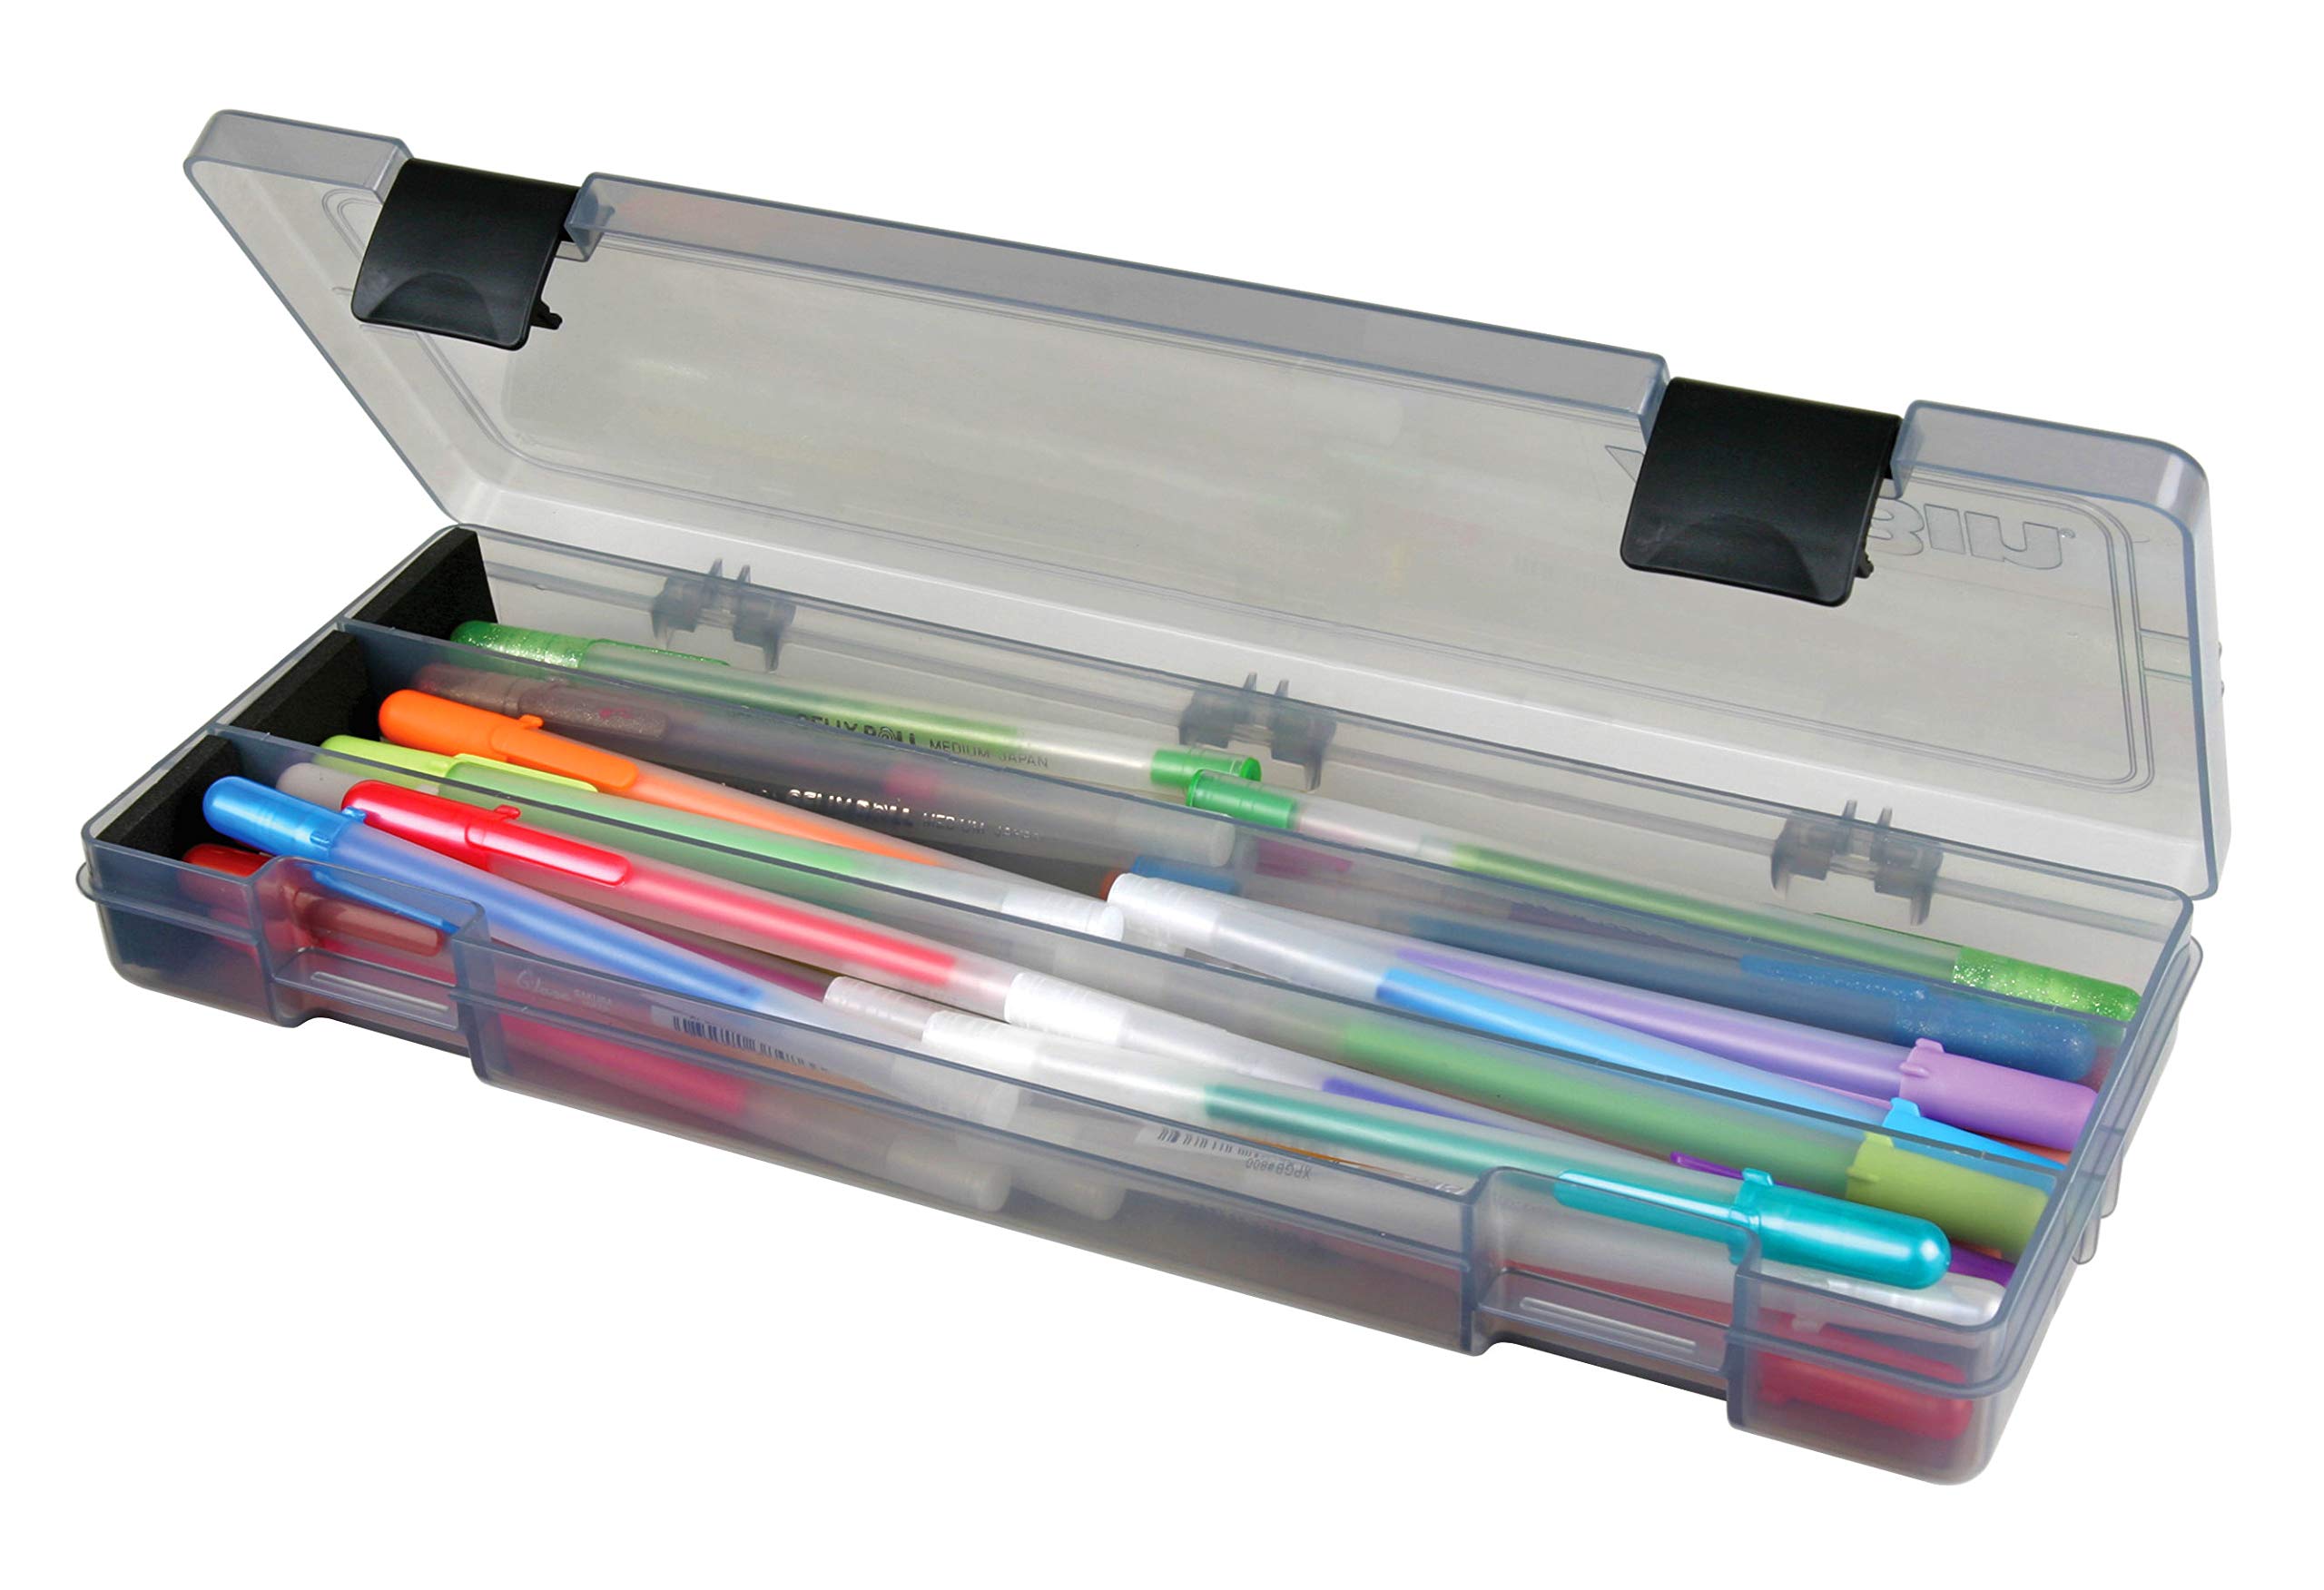 ArtBin 6900AB Pencil Utility Box, Art & Craft Organizer, [1] Divided Storage Box for Pens, Pencils, Markers, Paint Brushes, etc., Translucent Charcoal